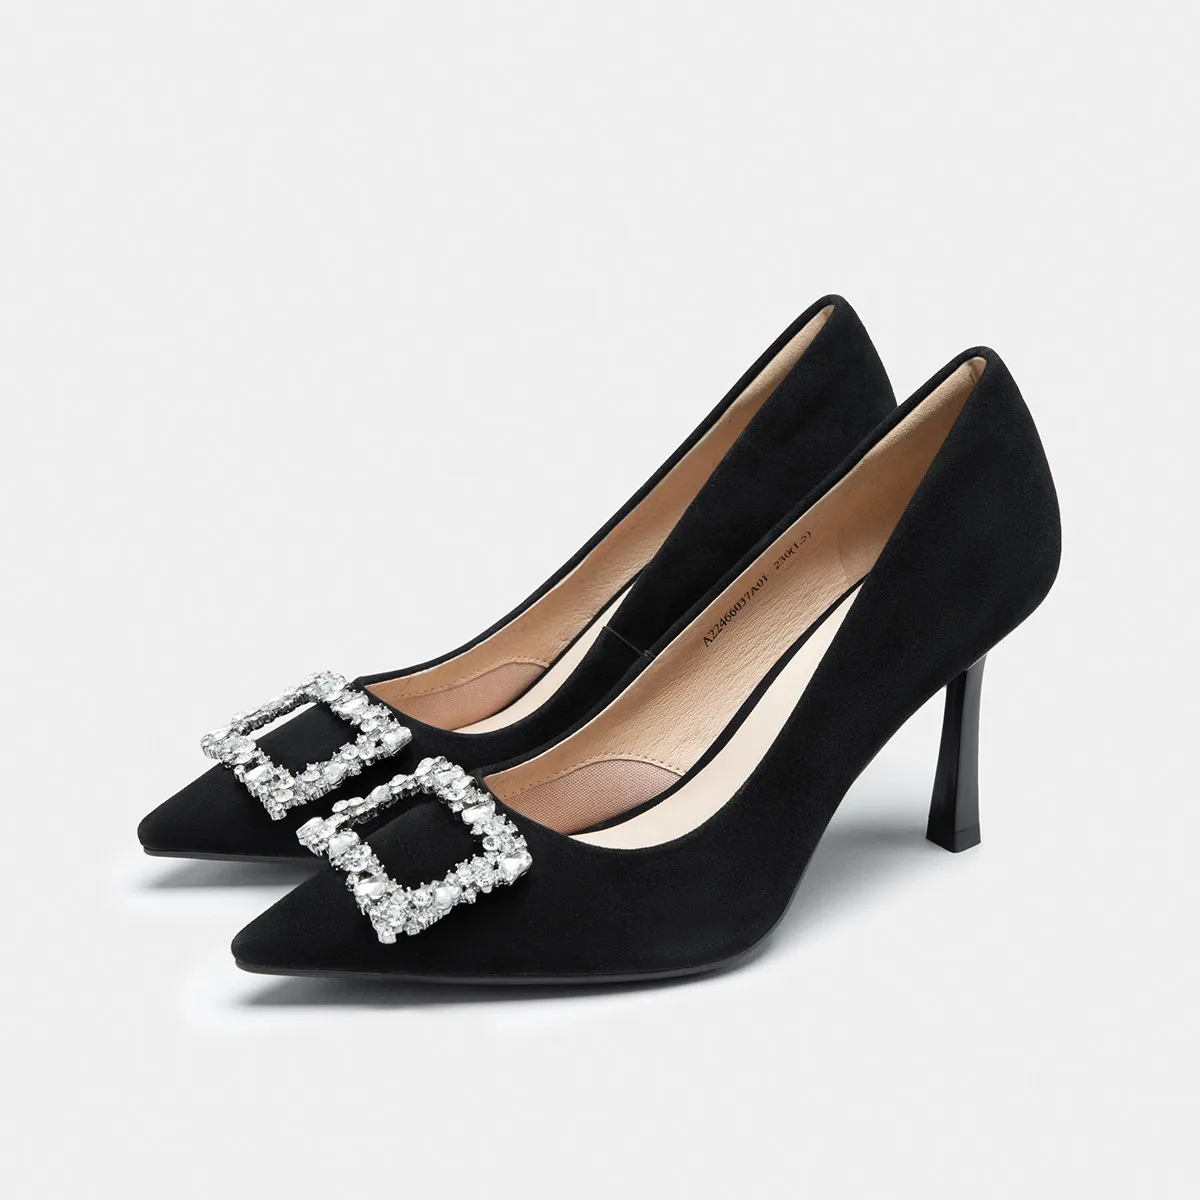 Elegant and Comfortable Black Heels by Naturalizer